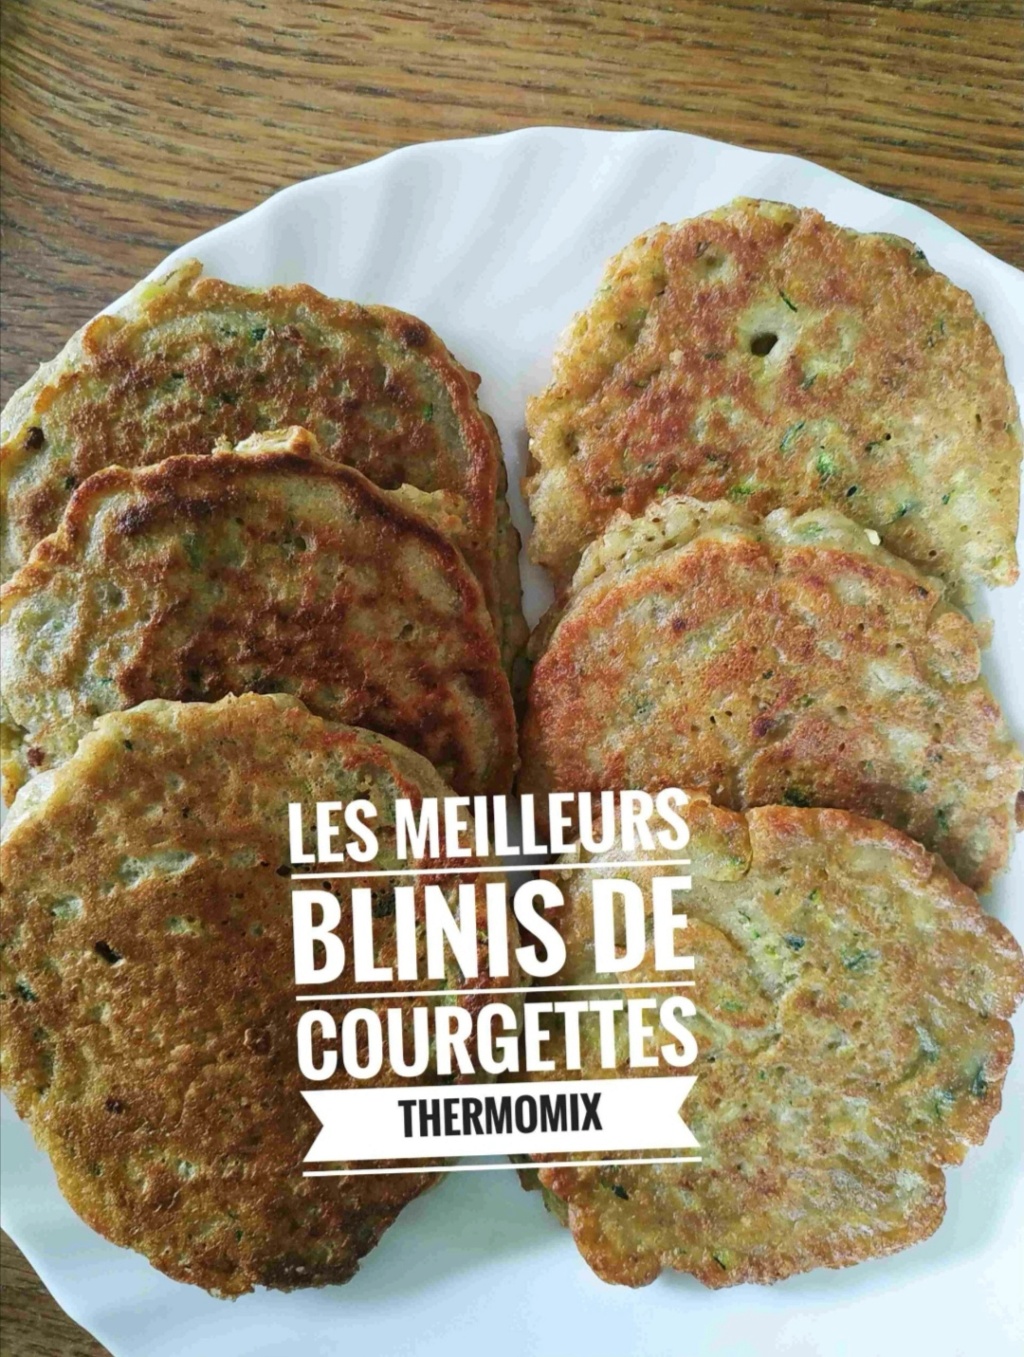 BLINIS DE COURGETTES EXTRA Screen12